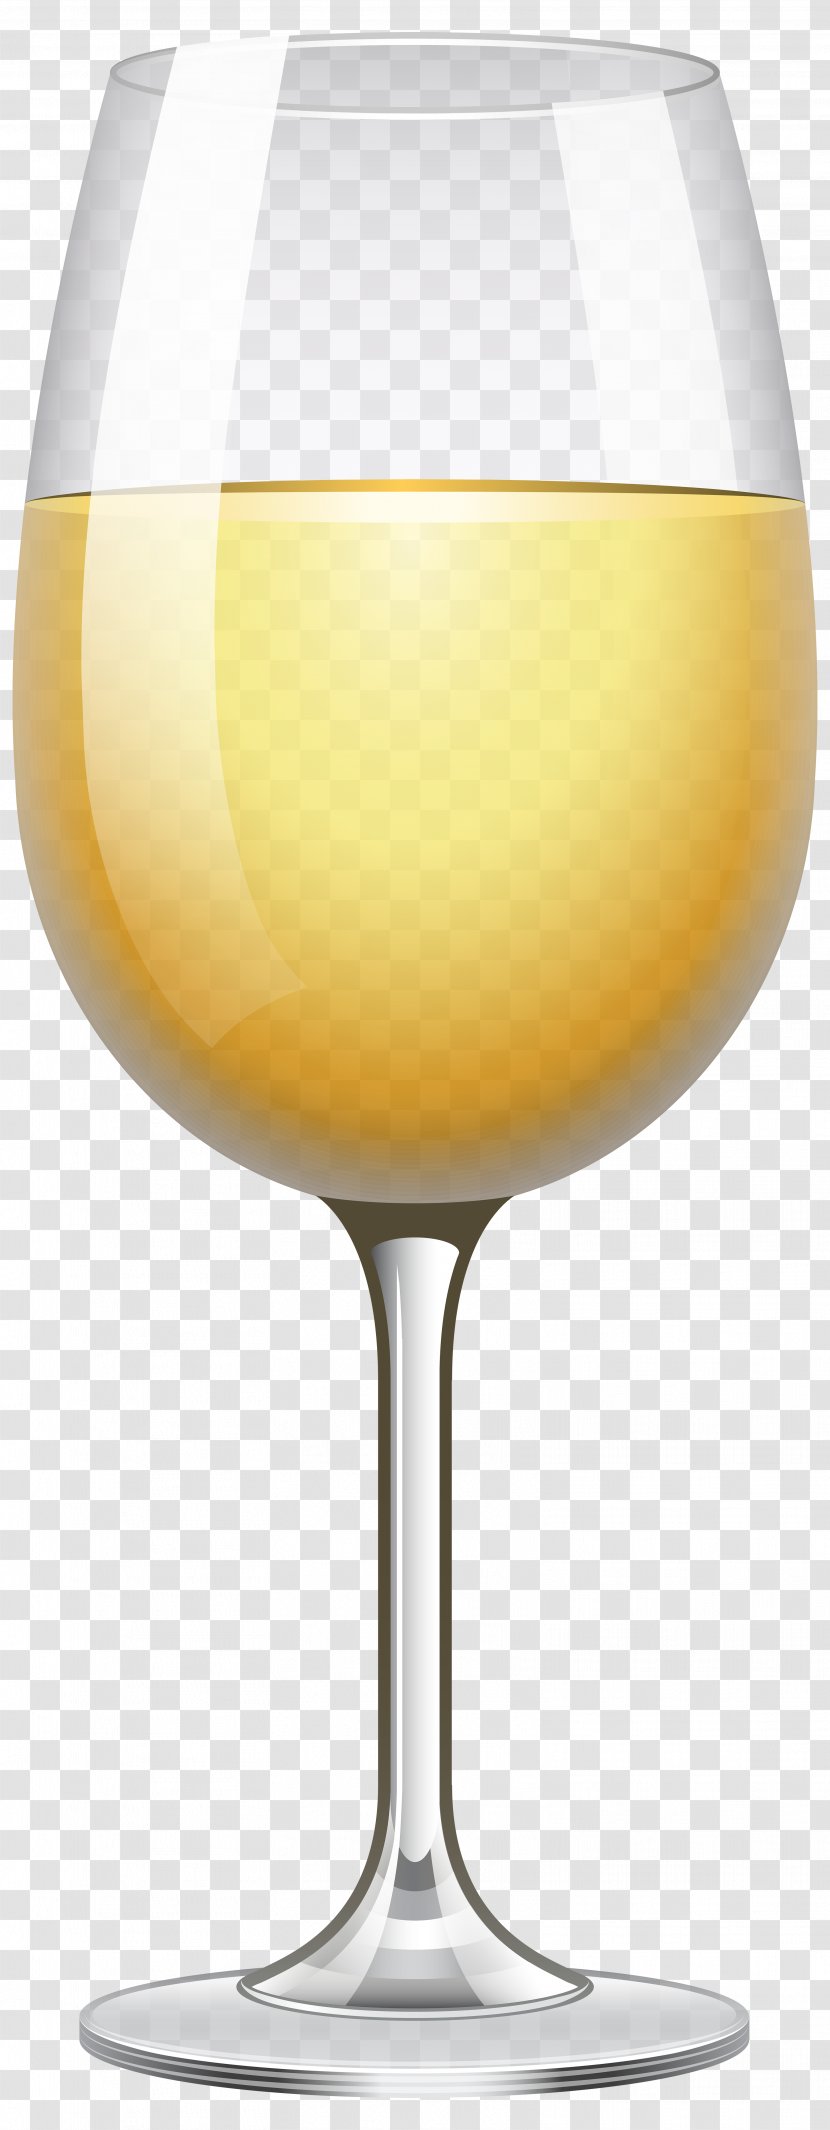 White Wine Red Cocktail Champagne - Glass Transparent Clip Art Image Transparent PNG